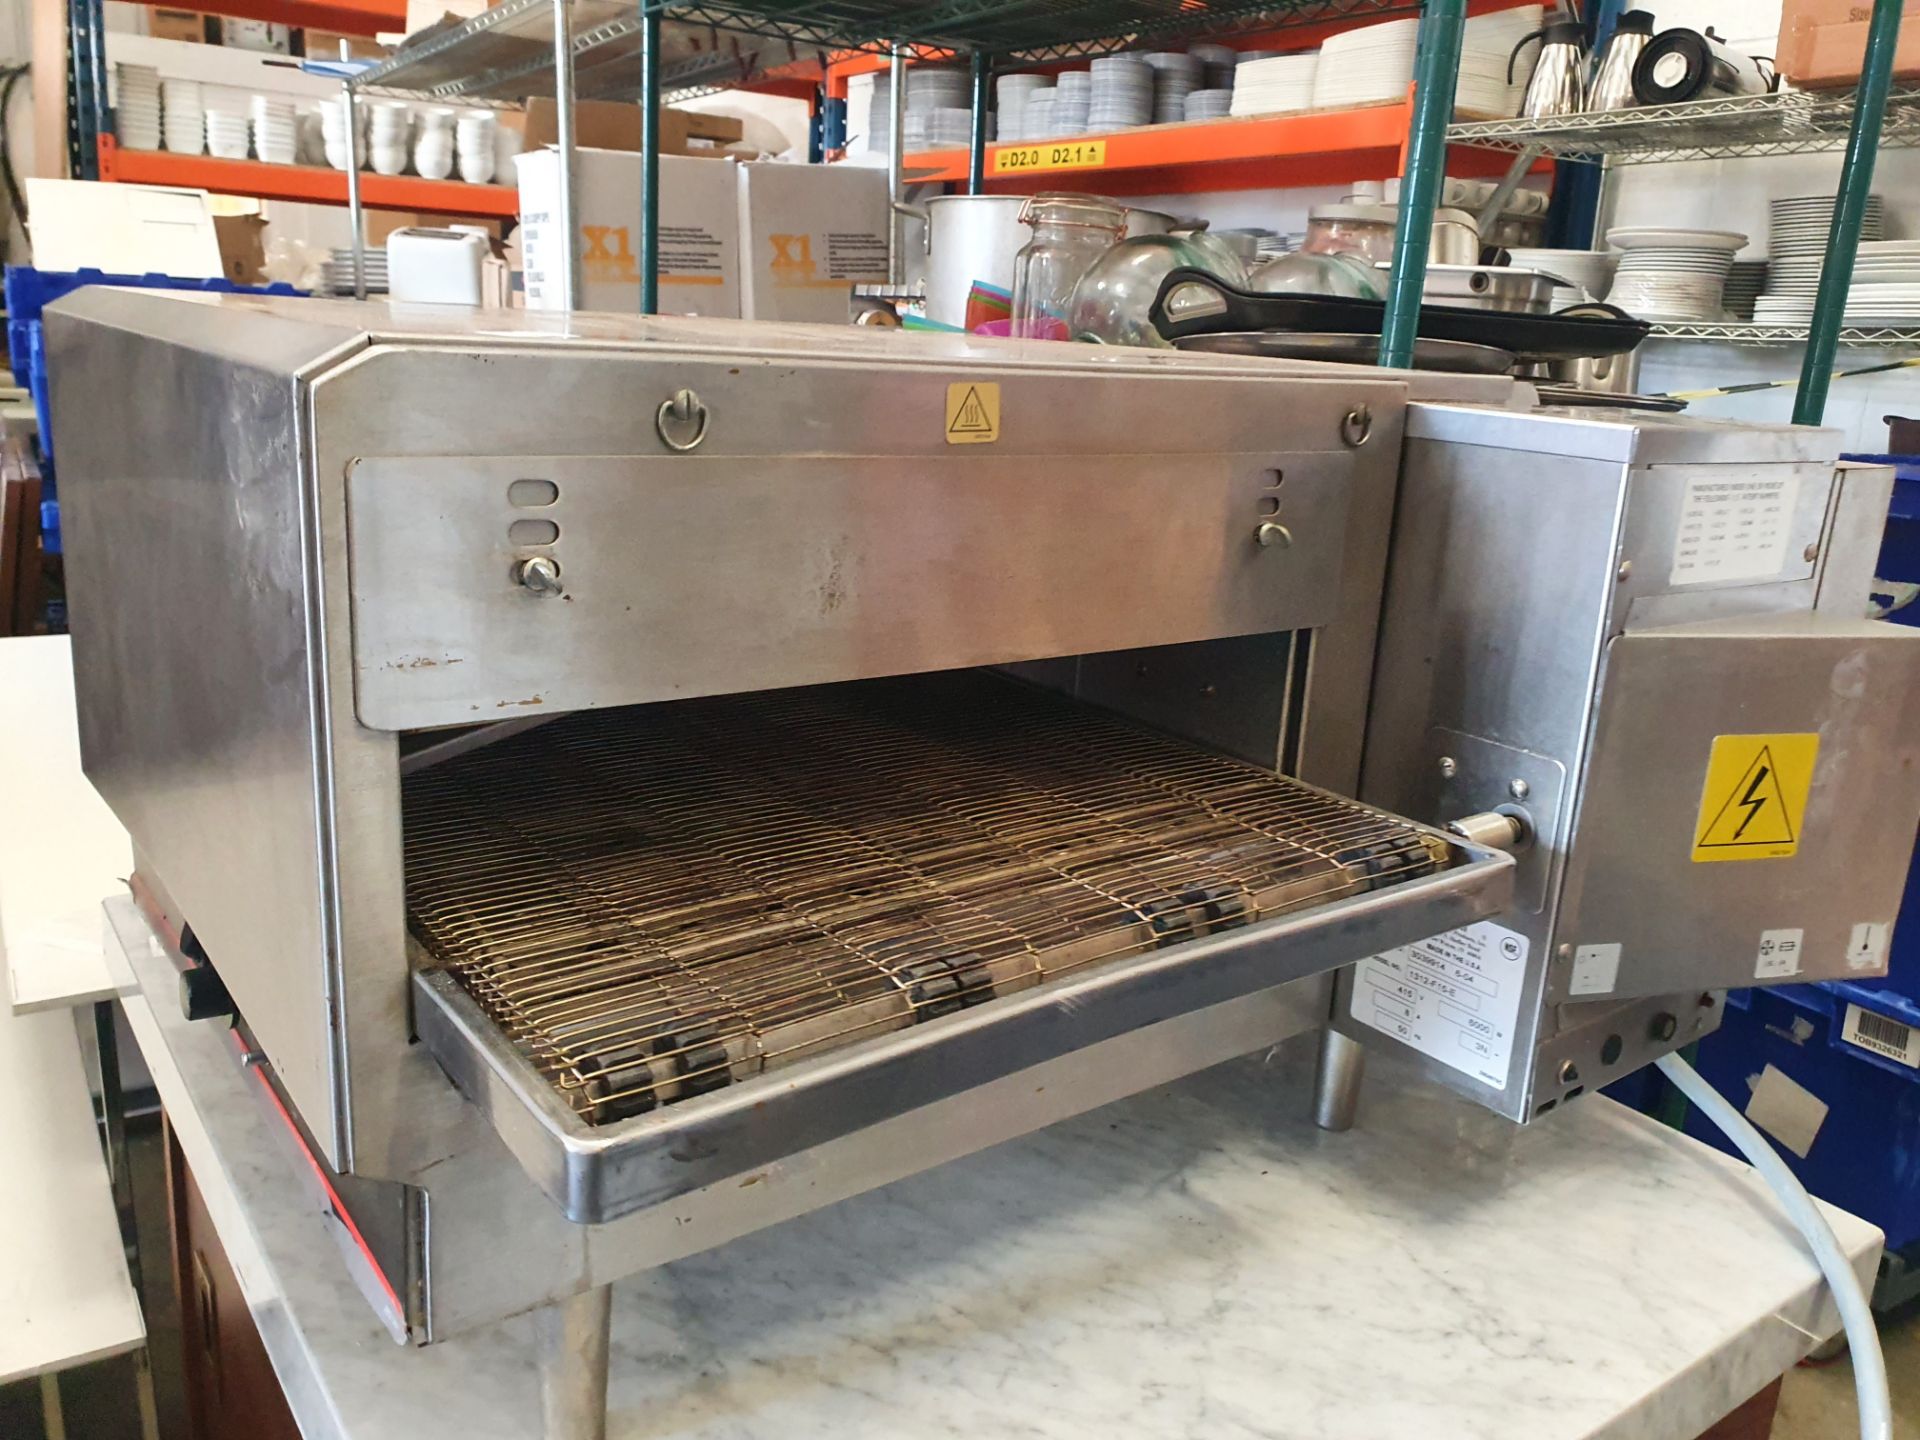 * Lincoln impinger convayor pizza oven, 3 phase - tested working - Image 6 of 6